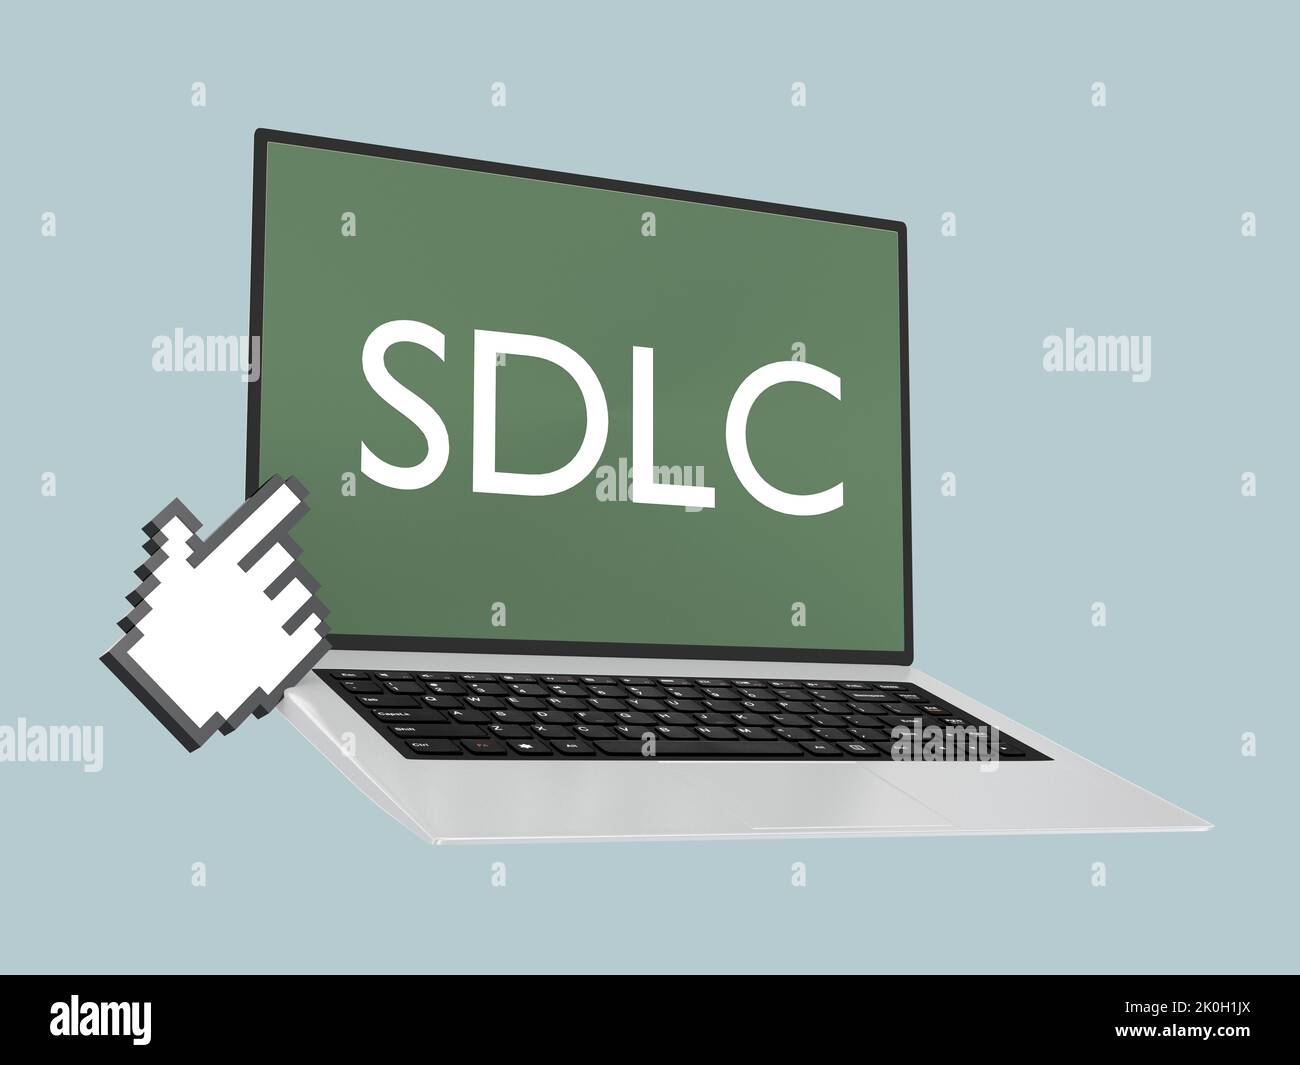 3D illustration of a symbolic hand pointing at a screen, with the script SDLC. Stock Photo